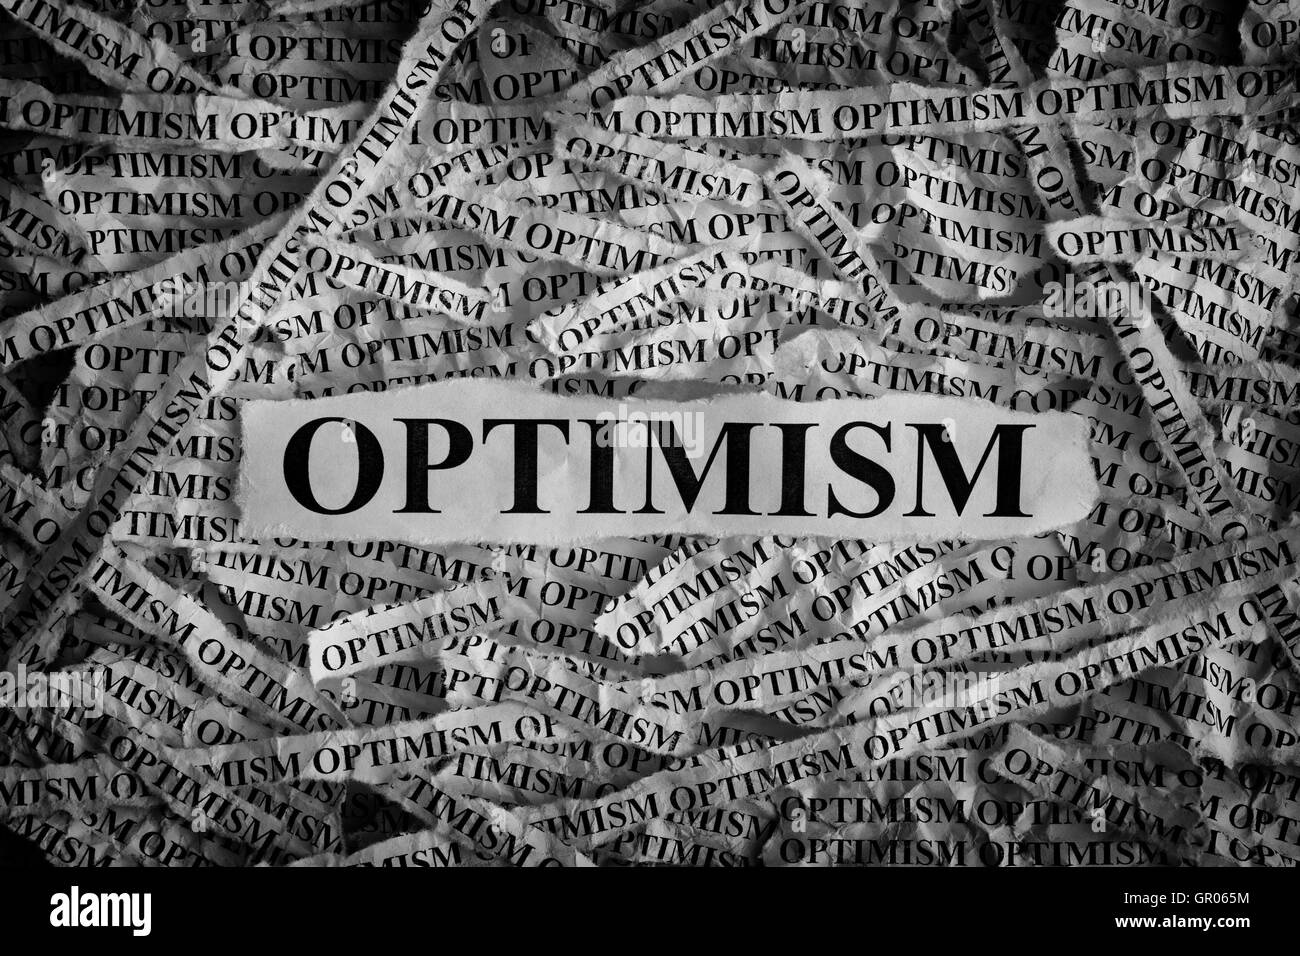 Optimism Black and White Stock Photos & Images - Alamy